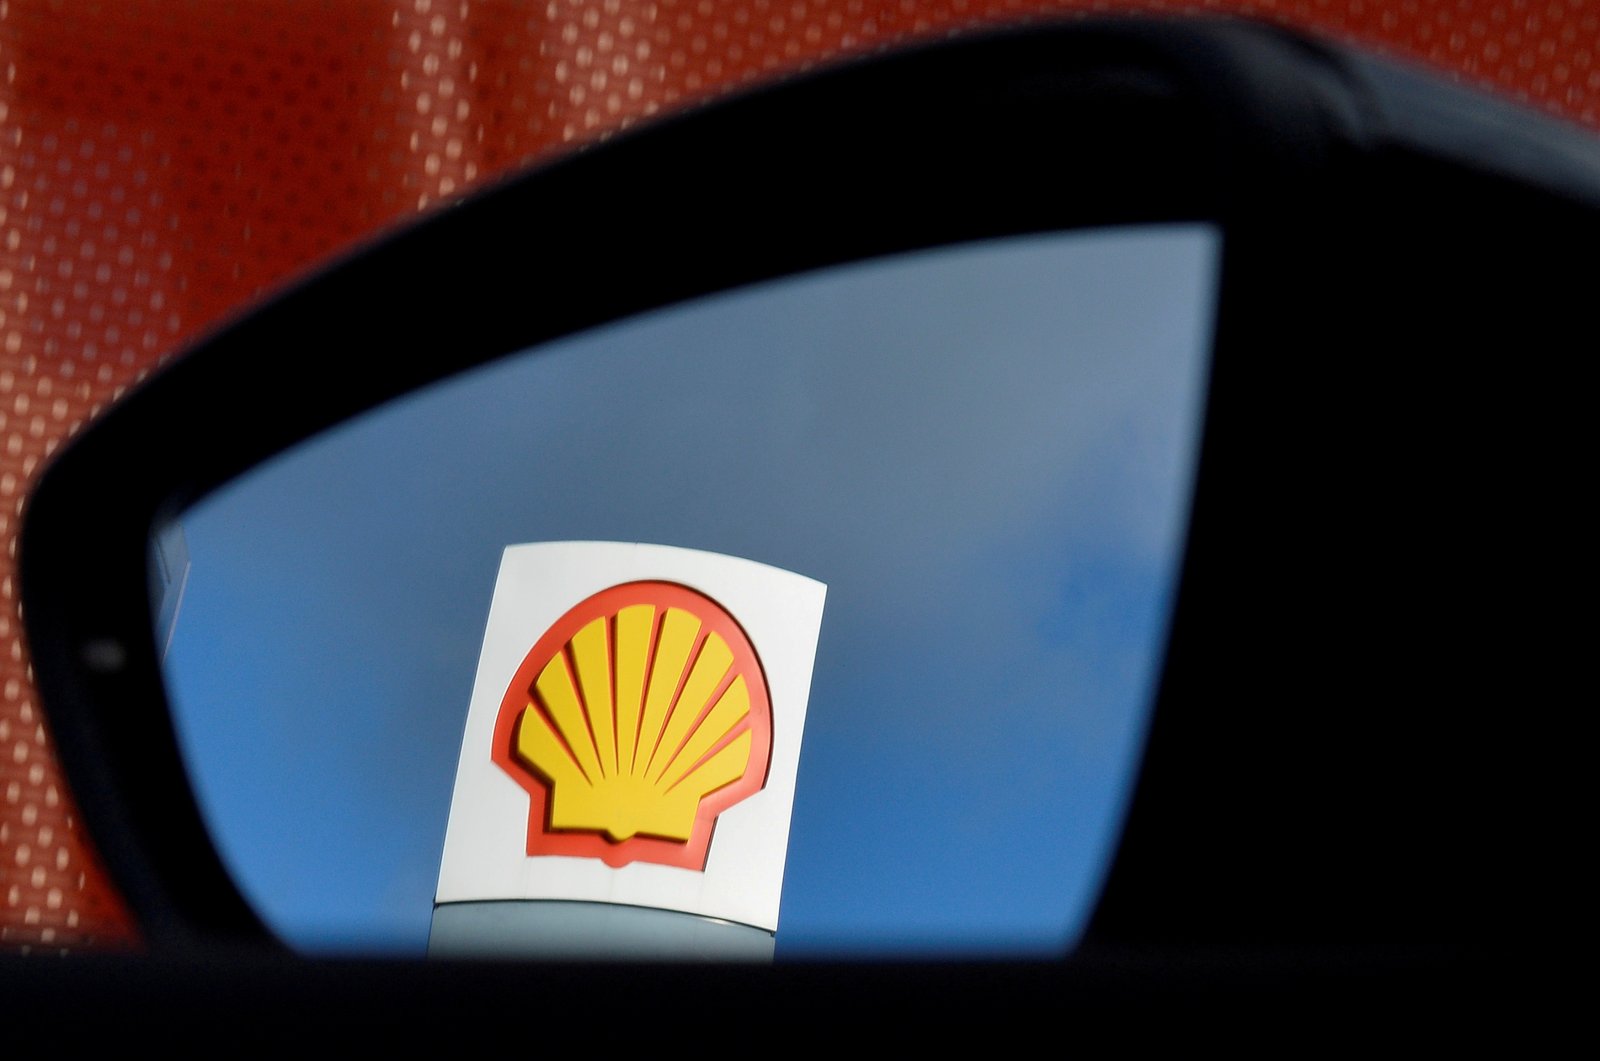 A Shell logo is seen reflected in a car's side mirror at a petrol station in west London, Britain, Jan. 29, 2015. (Reuters Photo)